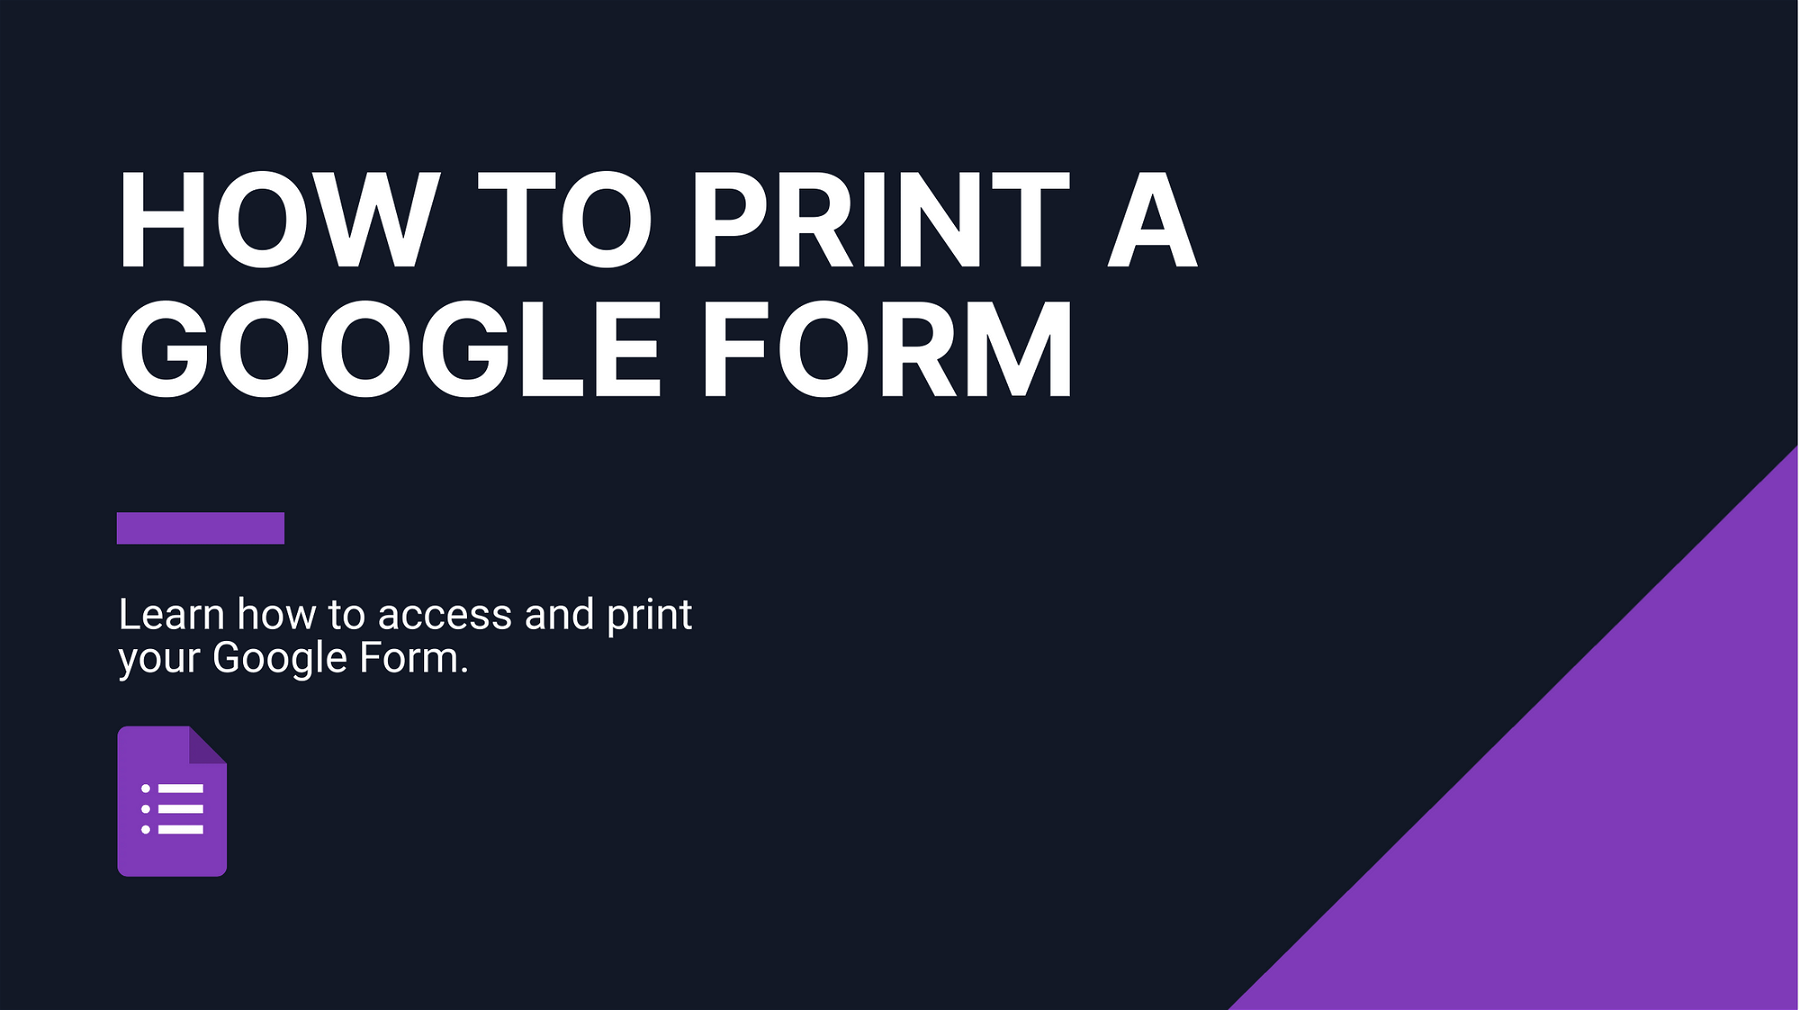 How to Print Google Form: A Step-by-Step Guide